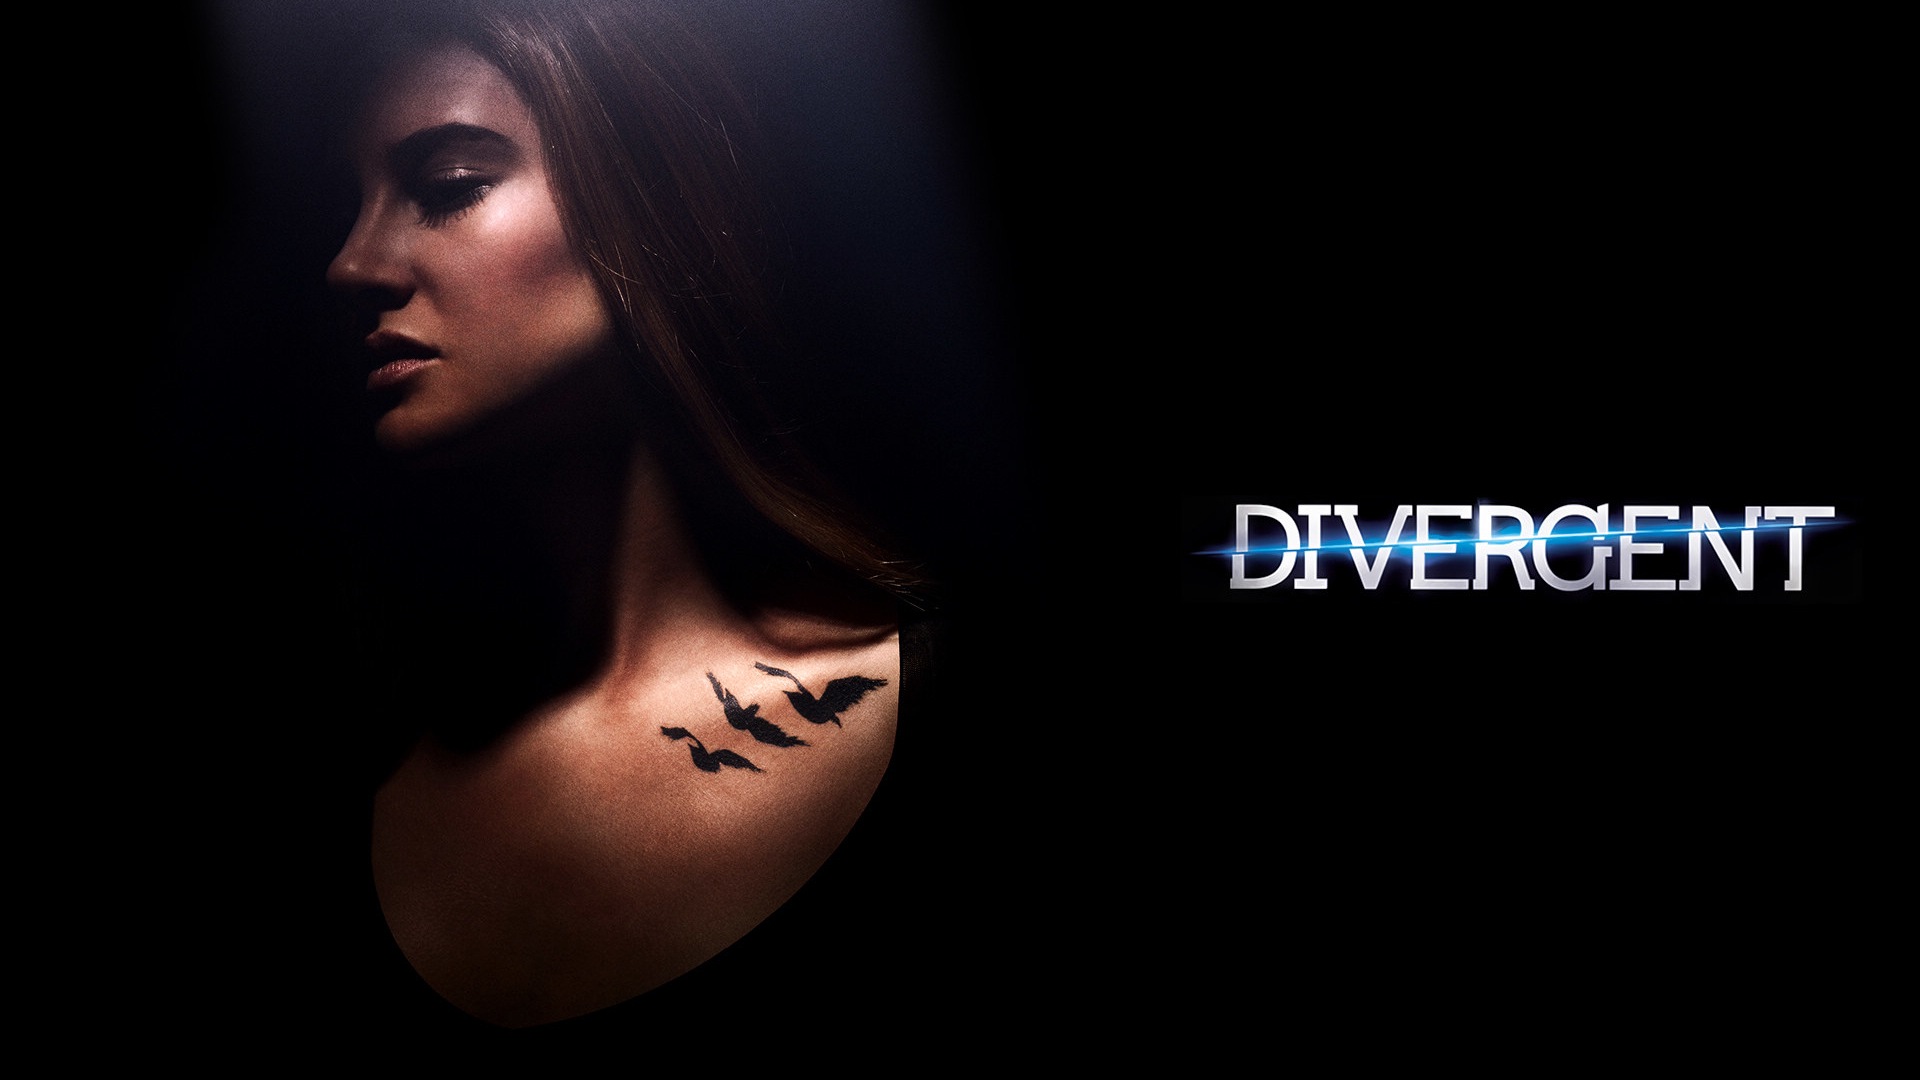 Divergent movie HD wallpapers #7 - 1920x1080